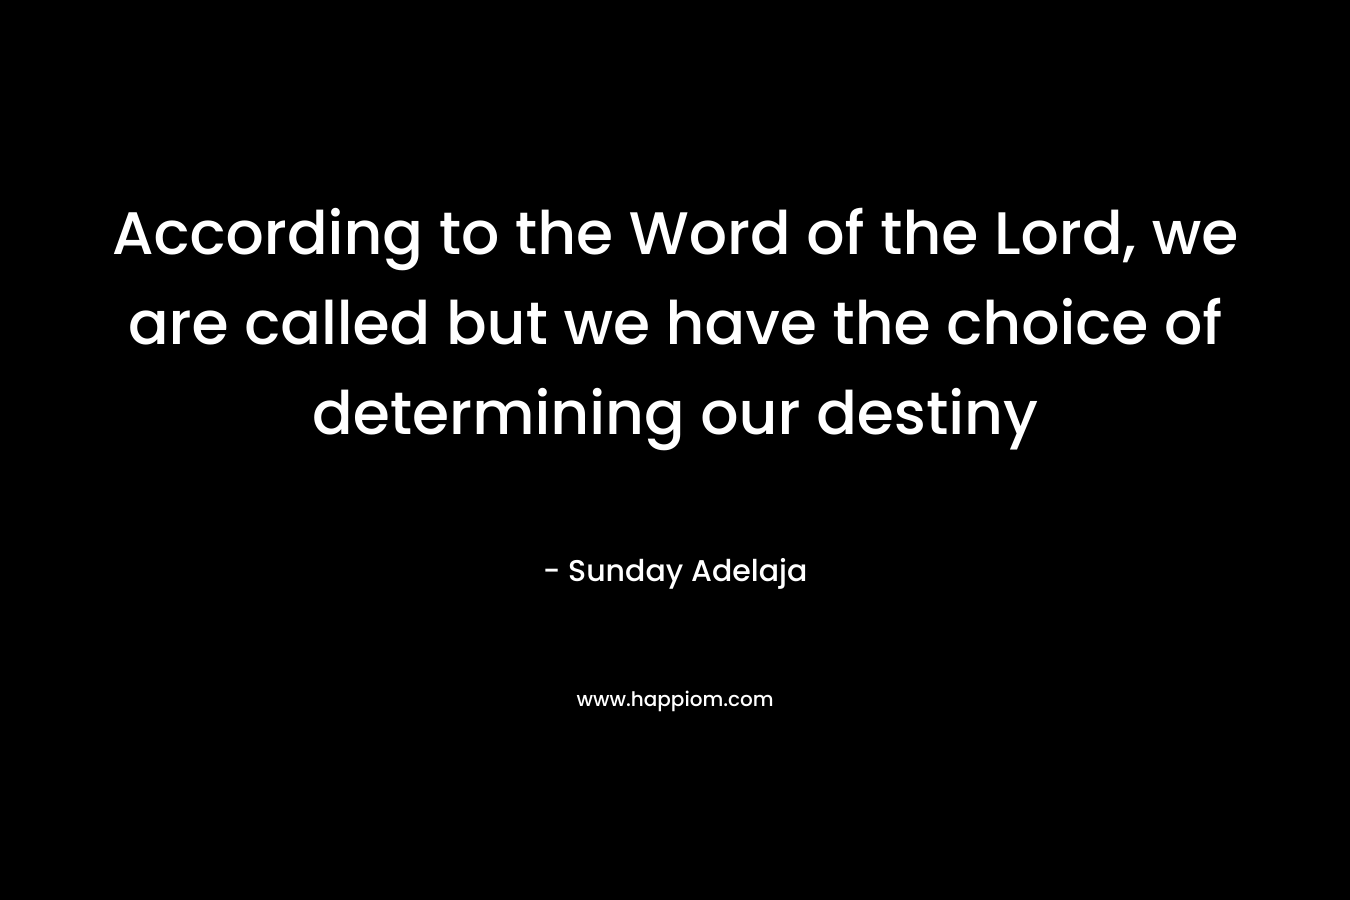 According to the Word of the Lord, we are called but we have the choice of determining our destiny